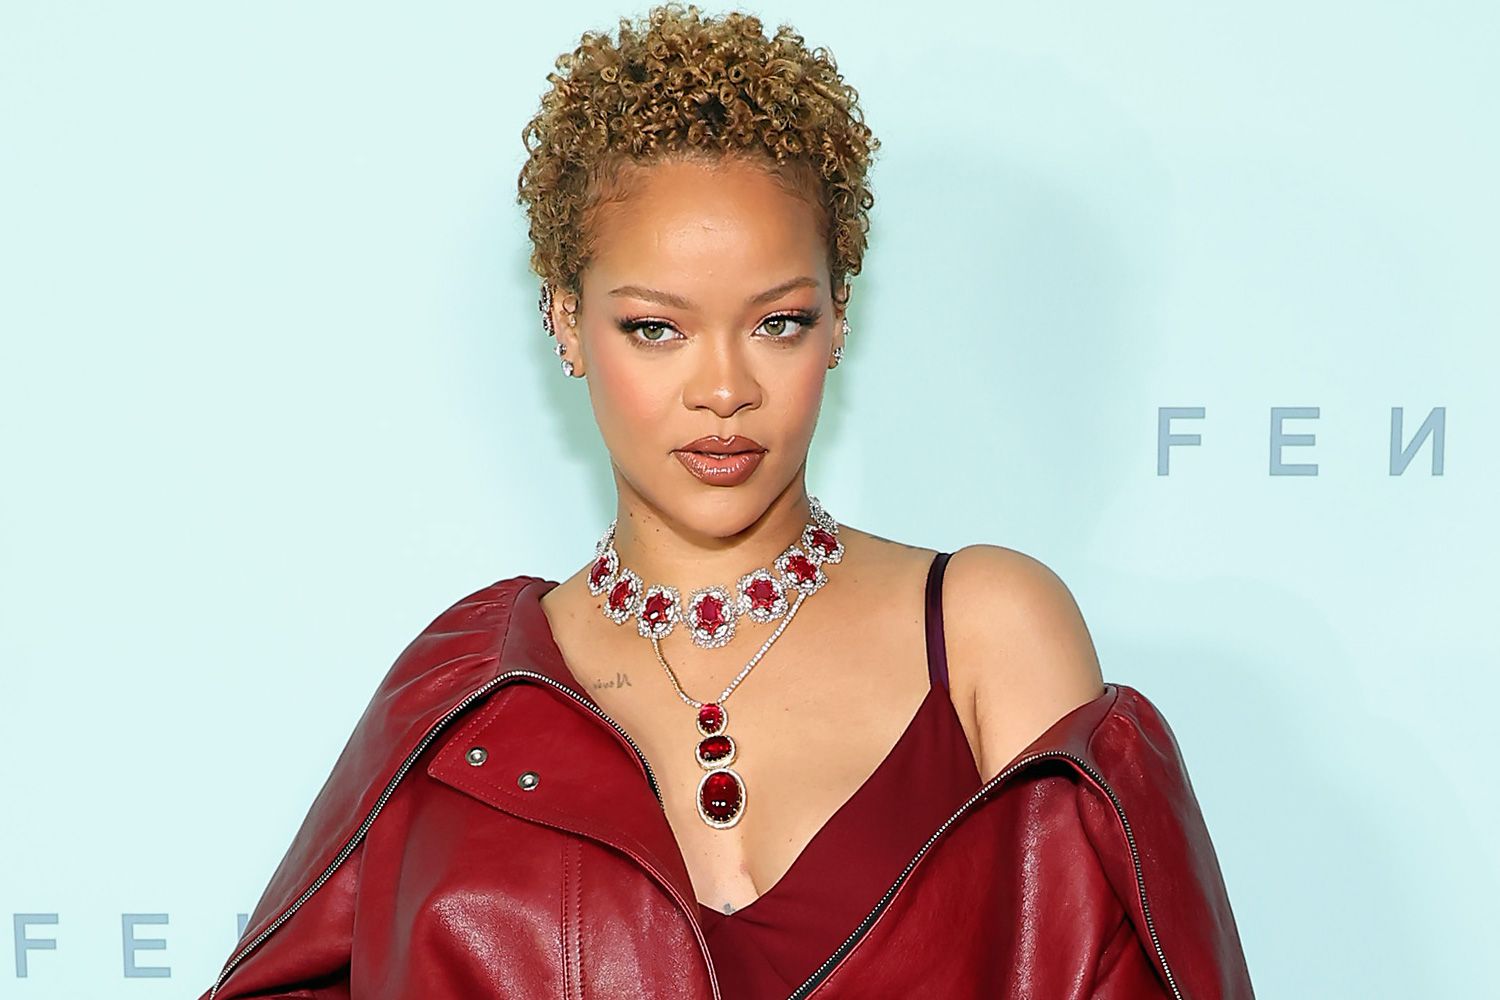 Rihanna Reveals Her Journey with Postpartum Hair Loss: ‘I Didn’t Expect It to Happen in Waves’ [Video]